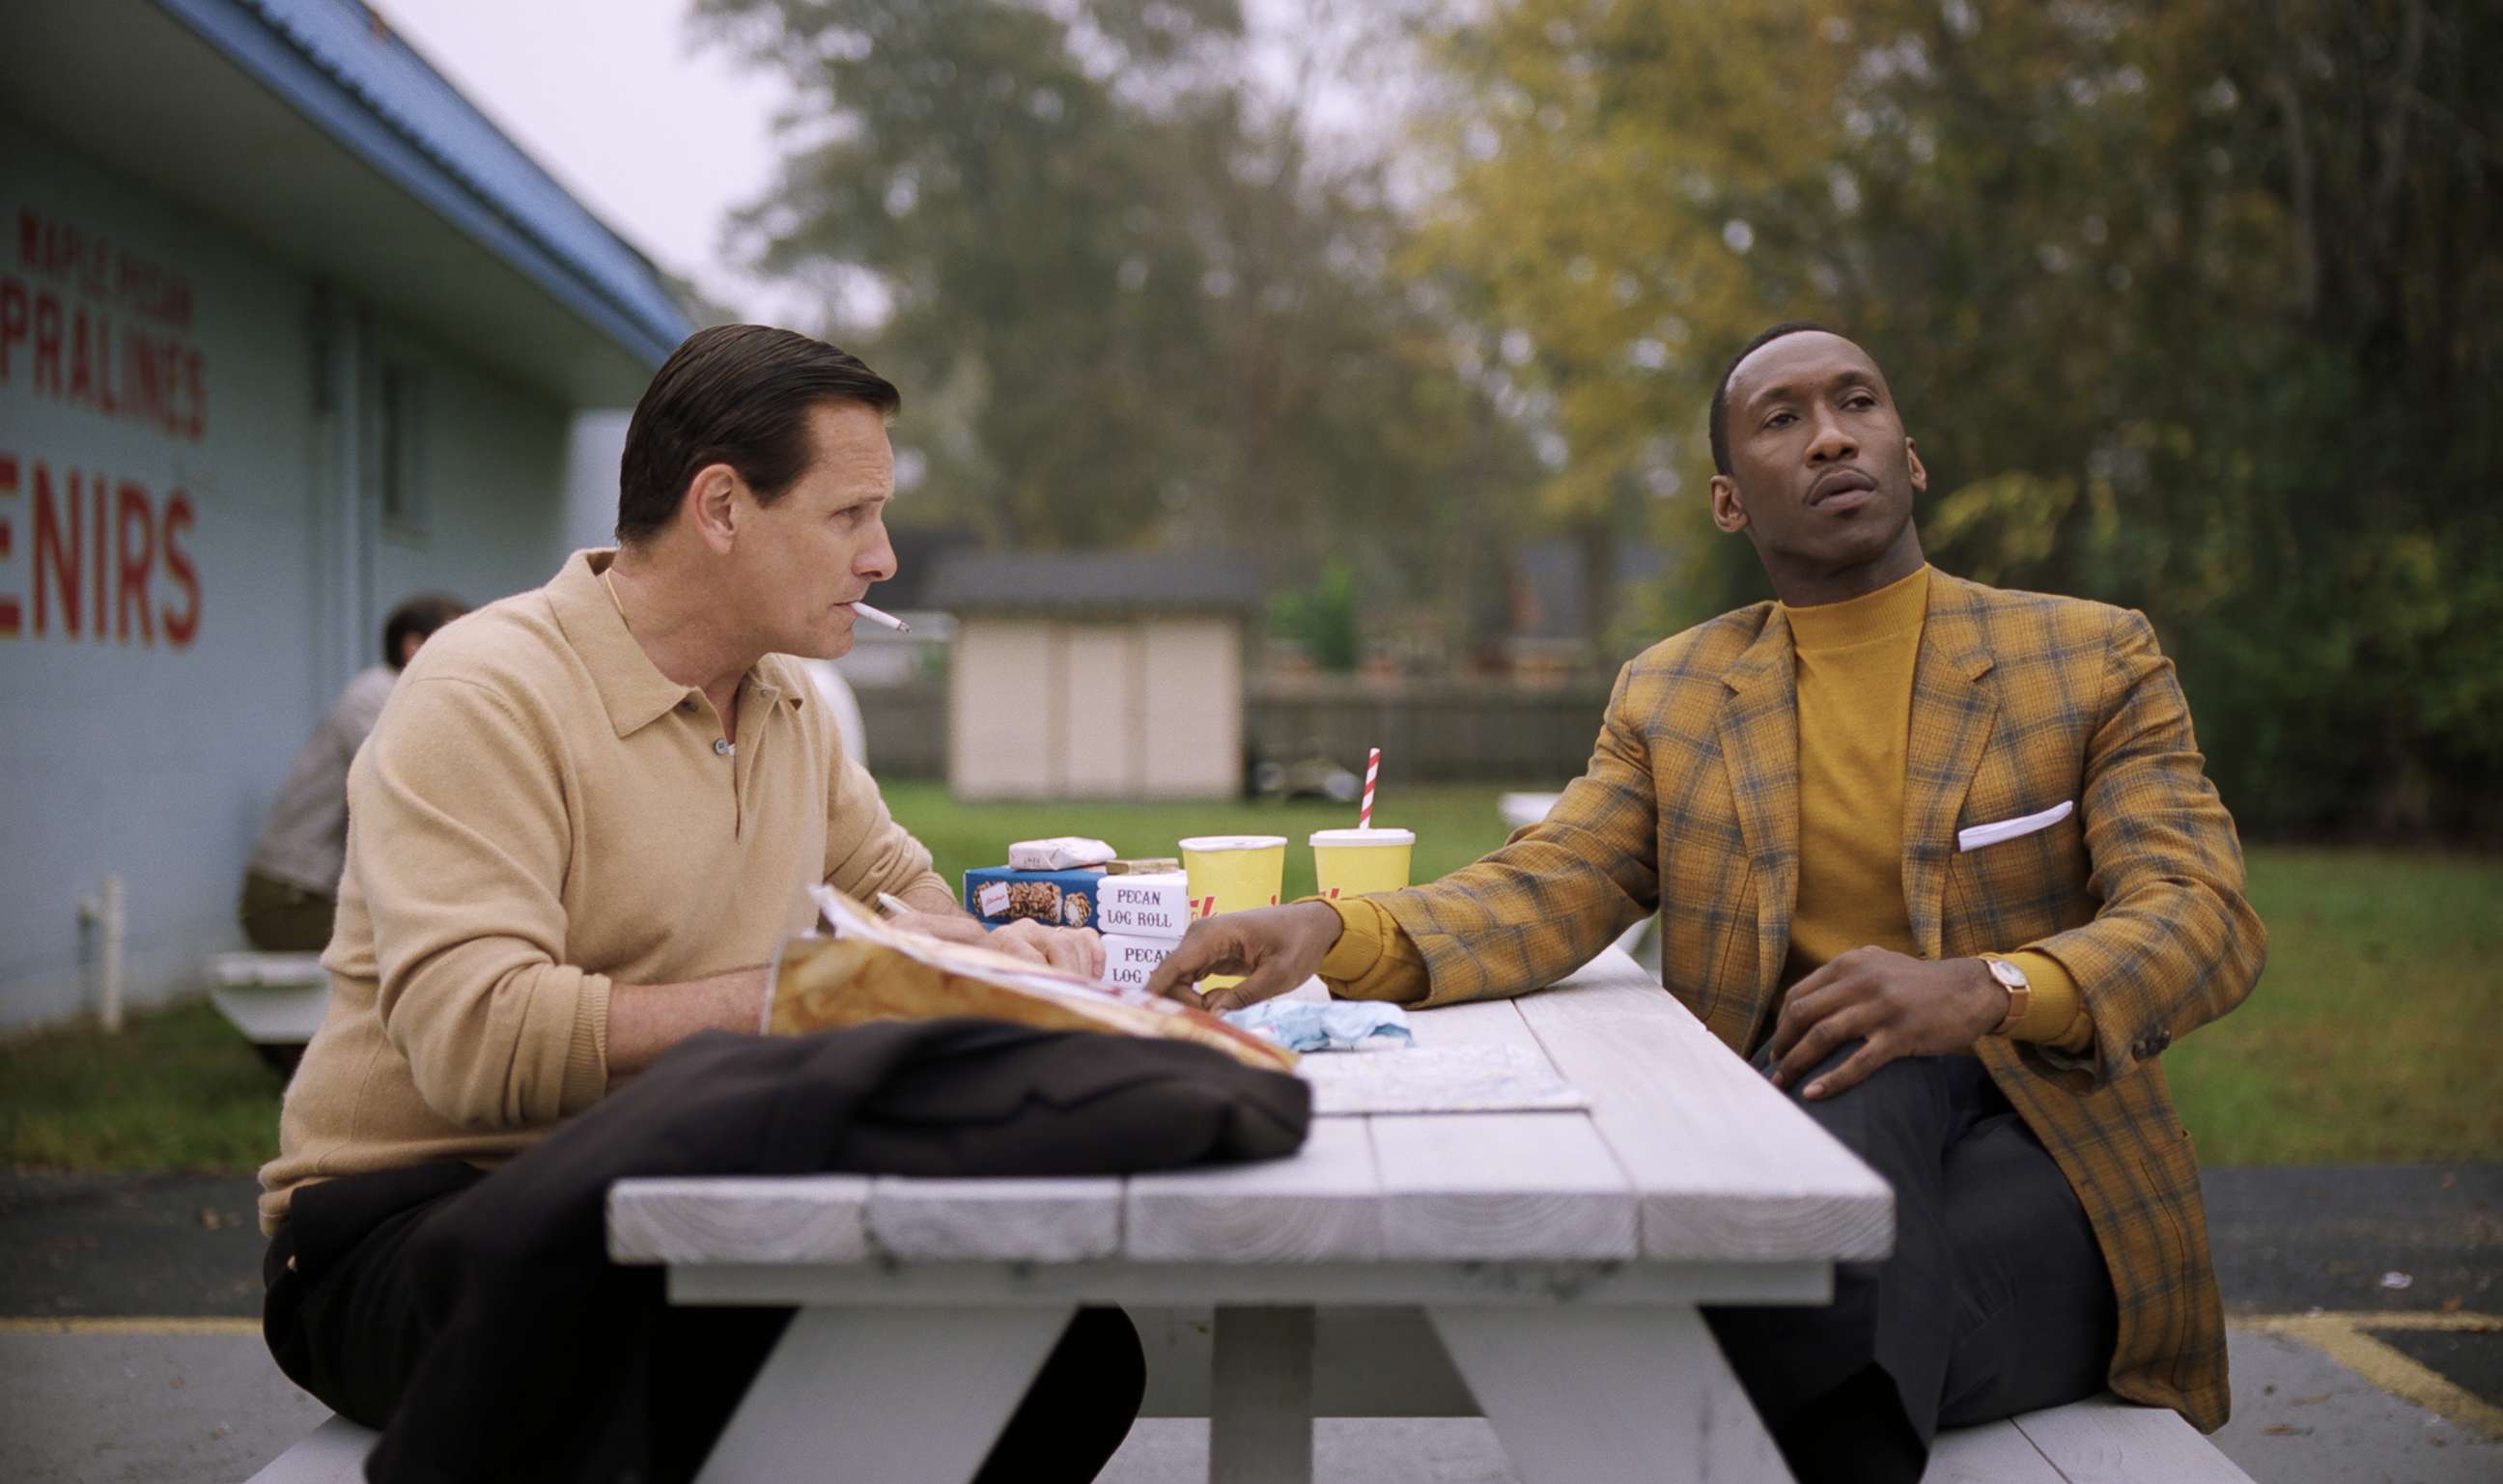 PHOTO: Viggo Mortensen as Tony Vallelonga and Mahershala Ali as Dr. Donald Shirley in "Green Book," directed by Peter Farrelly.